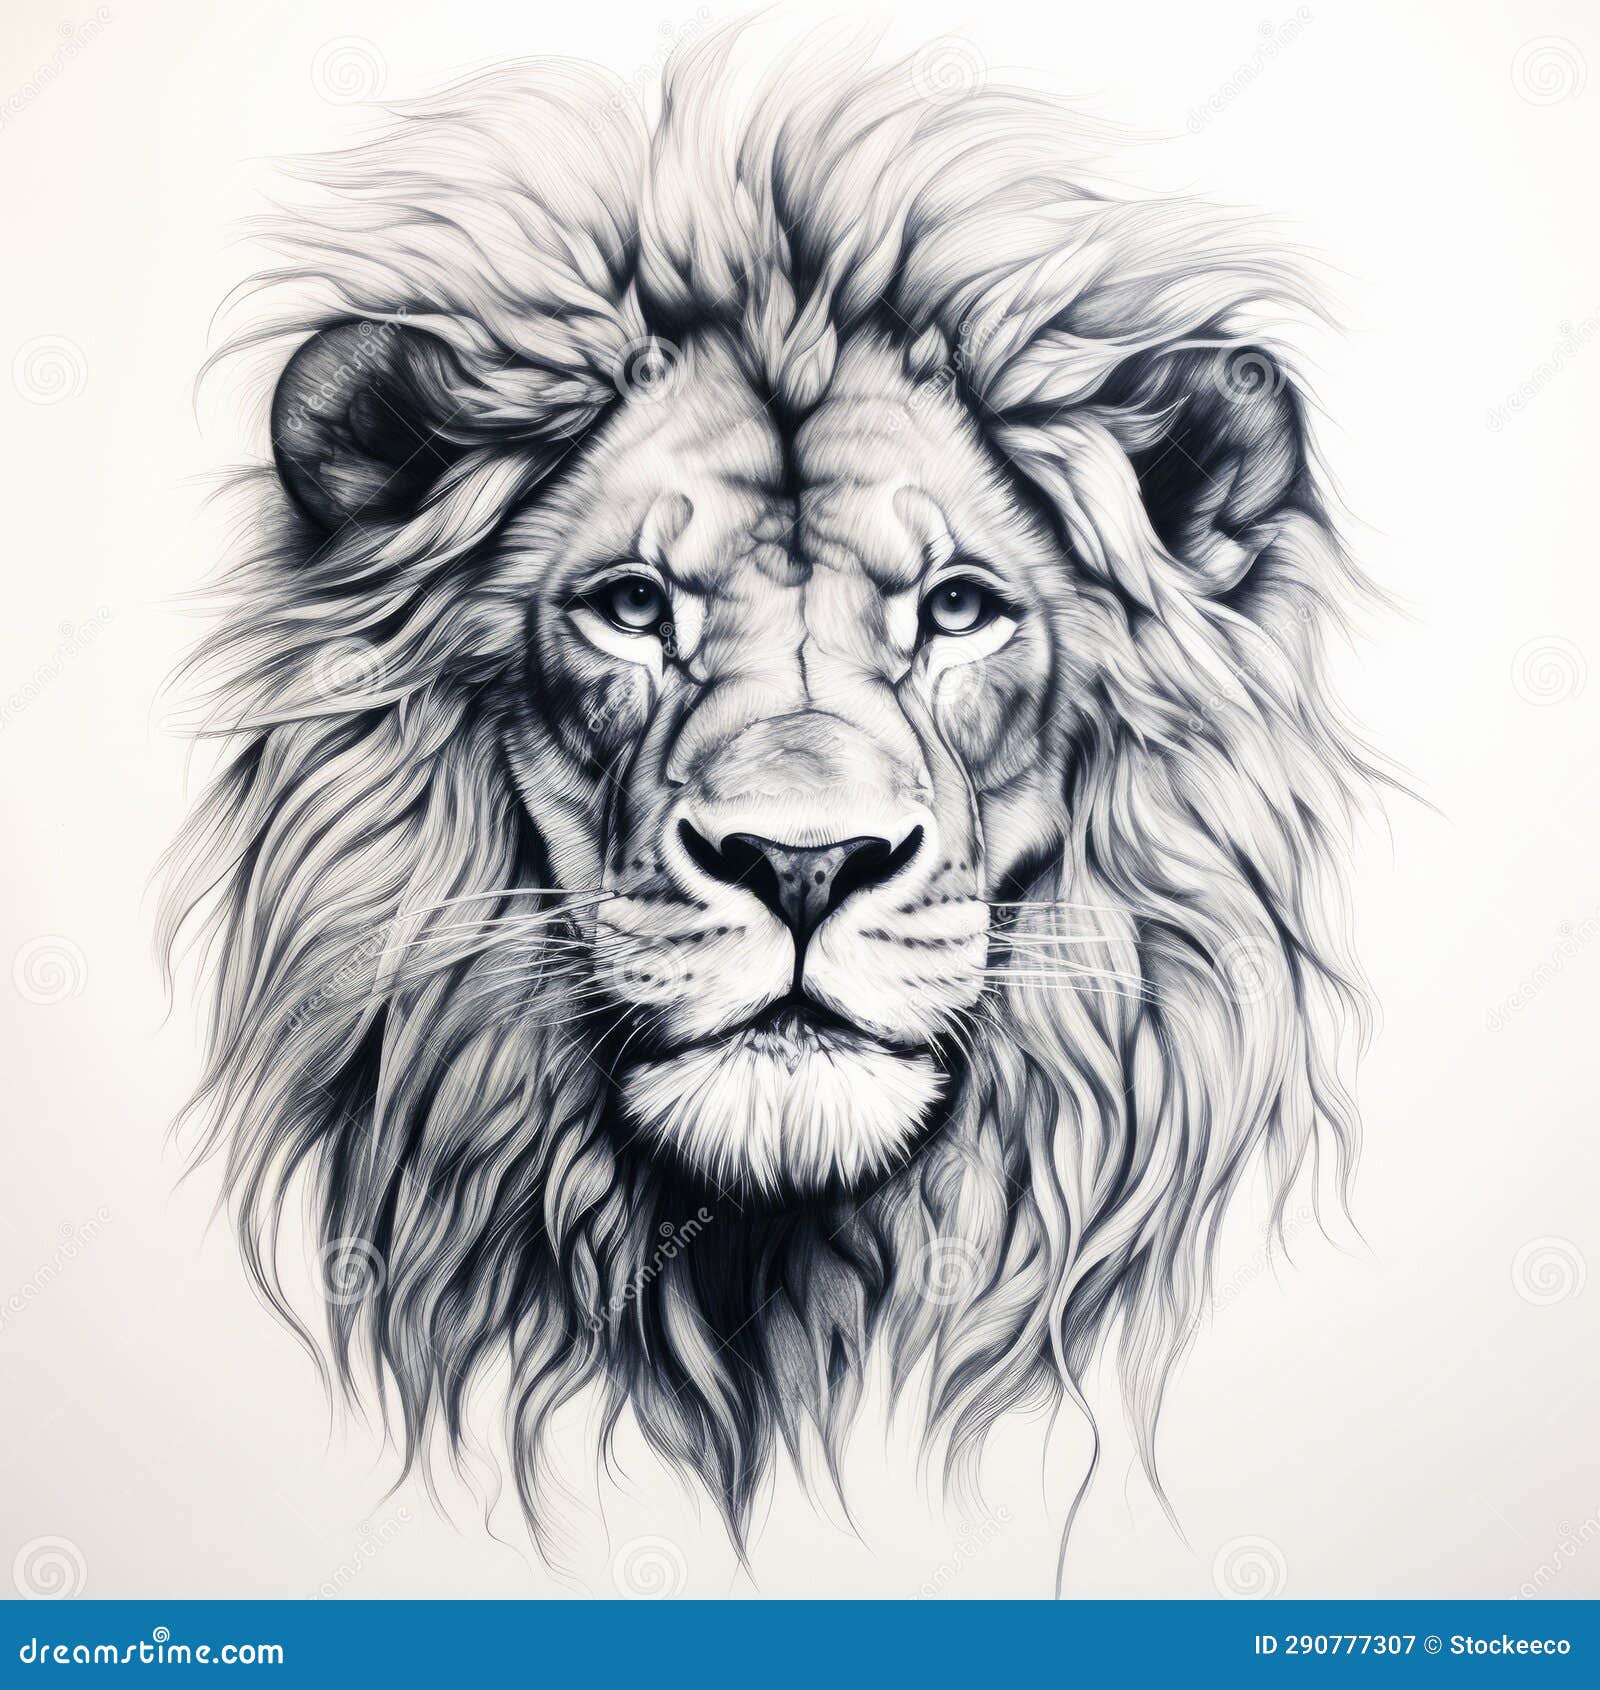 Lion Drawing - Made with HAPPY-saigonsouth.com.vn